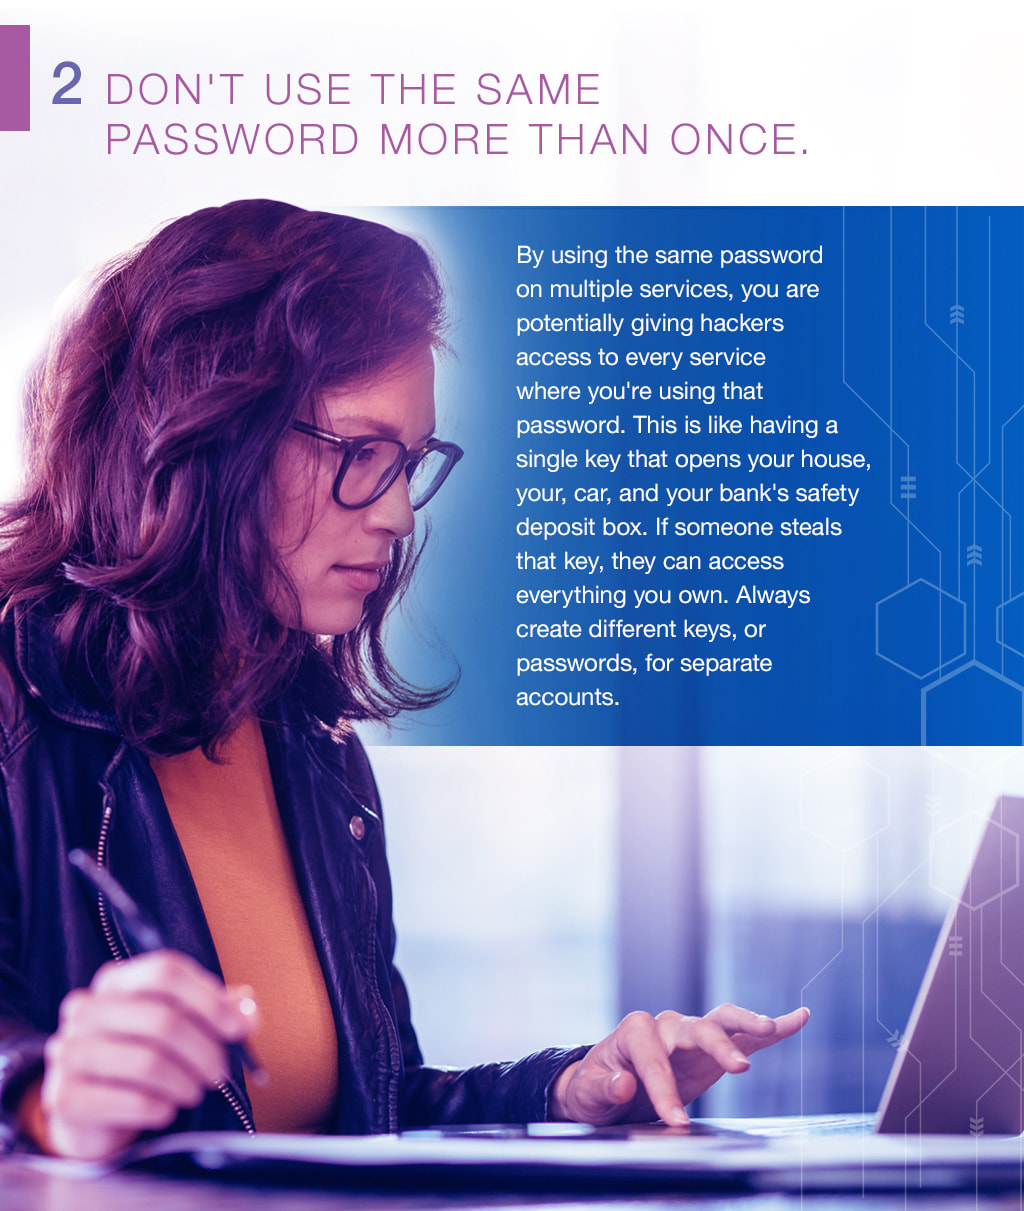 2.Don't use the same  password more than once. By using the same password on multiple services, you are potentially giving hackers access to every service where you're using that password. This is like having a single key that opens your house, your, car, and your bank's safety deposit box. If someone steals that key, they can access everything you own. Always create different keys, or passwords, for separate accounts.